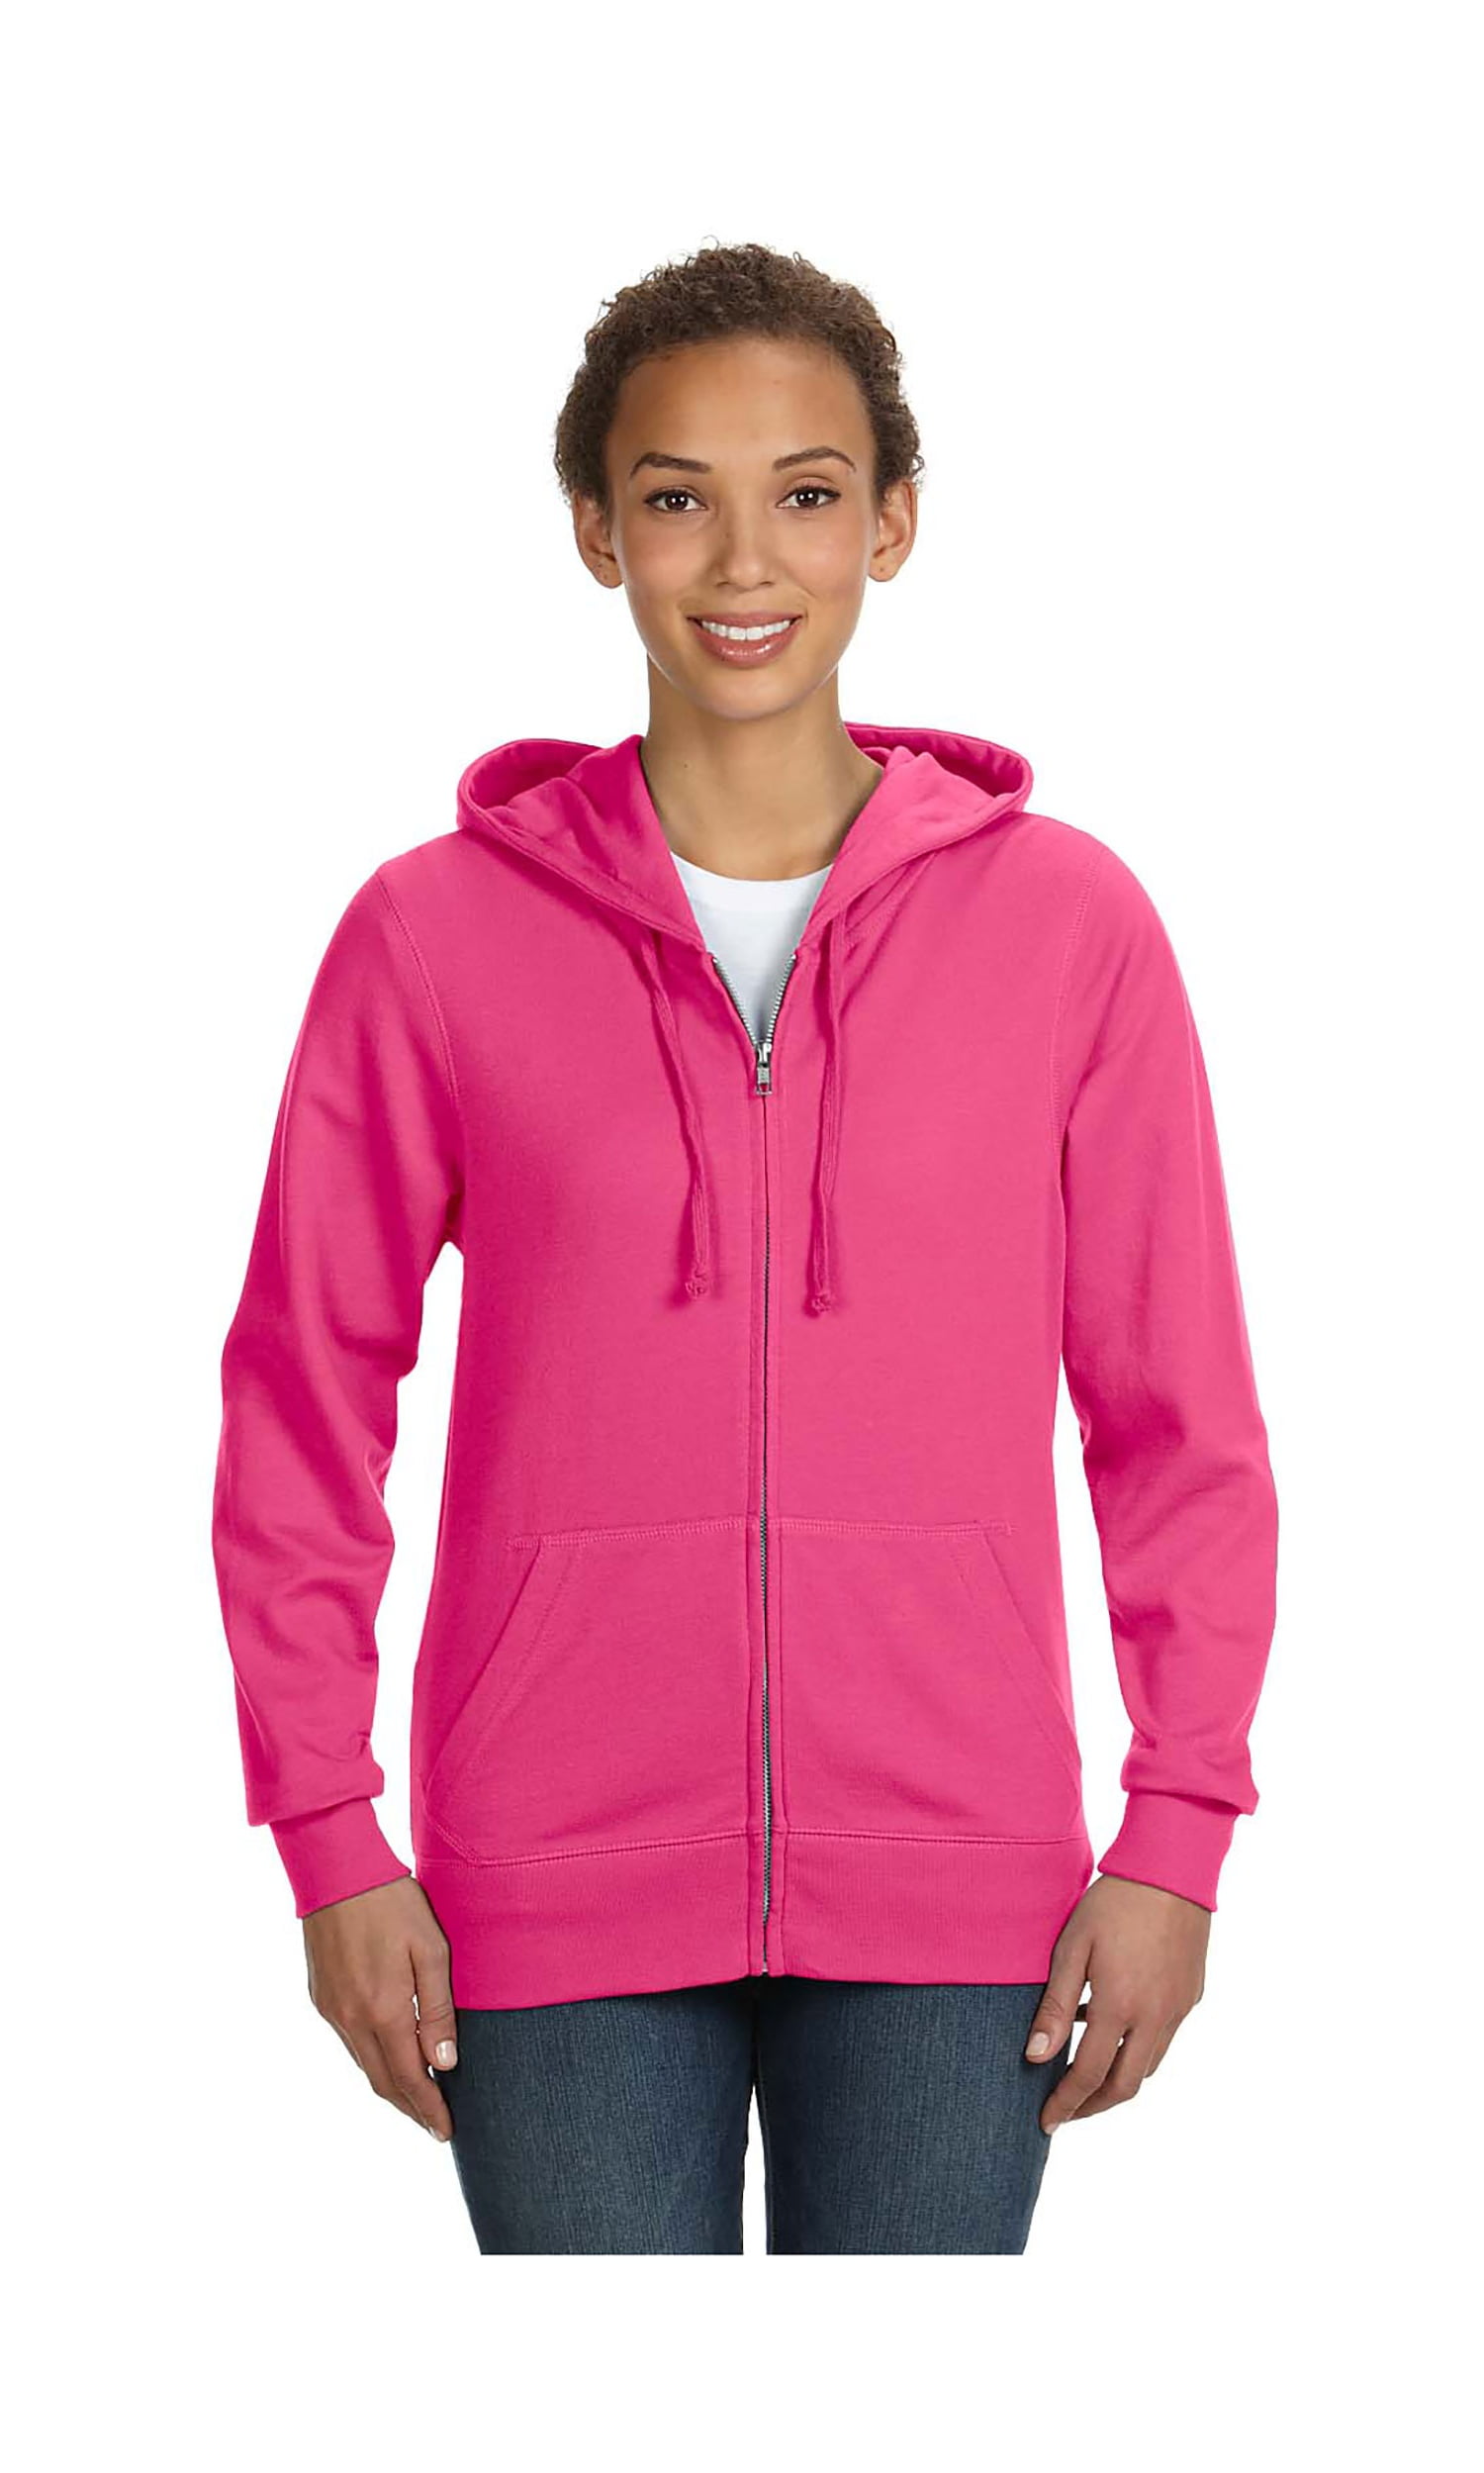 LAT Women's Lightweight French Terry Zip Front Hoodie, Style 3763 ...